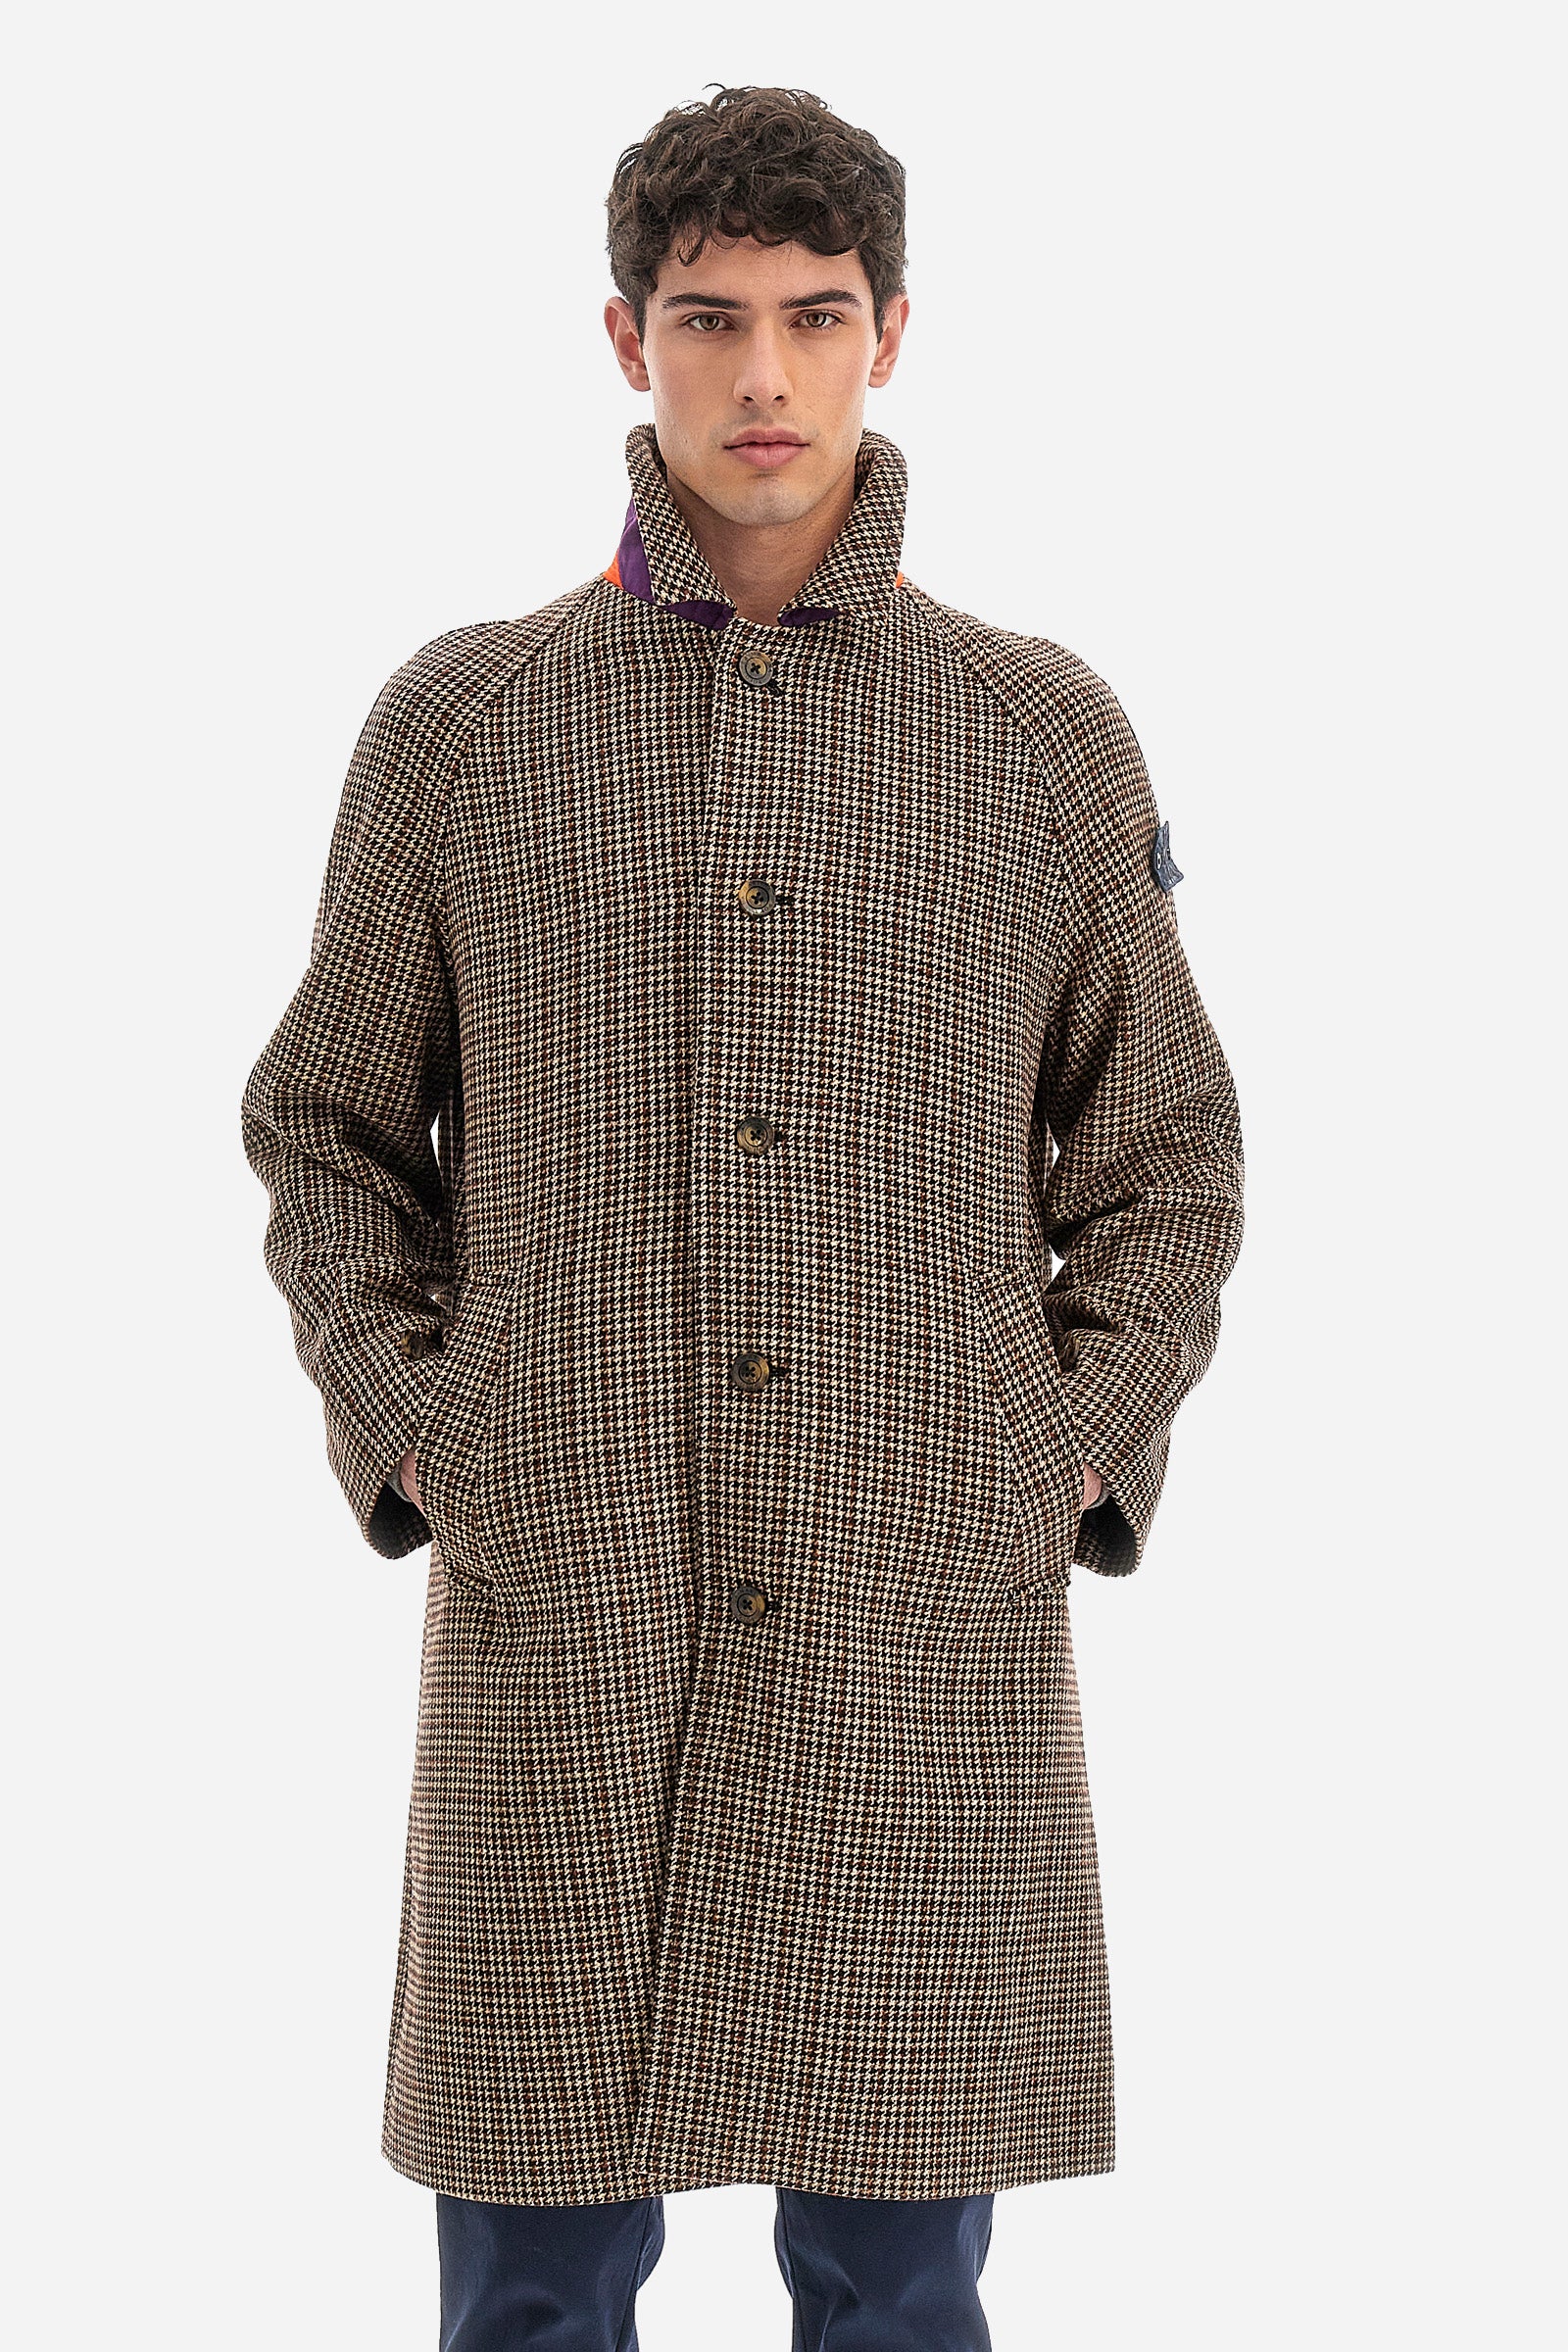 Outdoor cappotto uomo regular fit - Worthington - Molè/RustBrown/OffWh